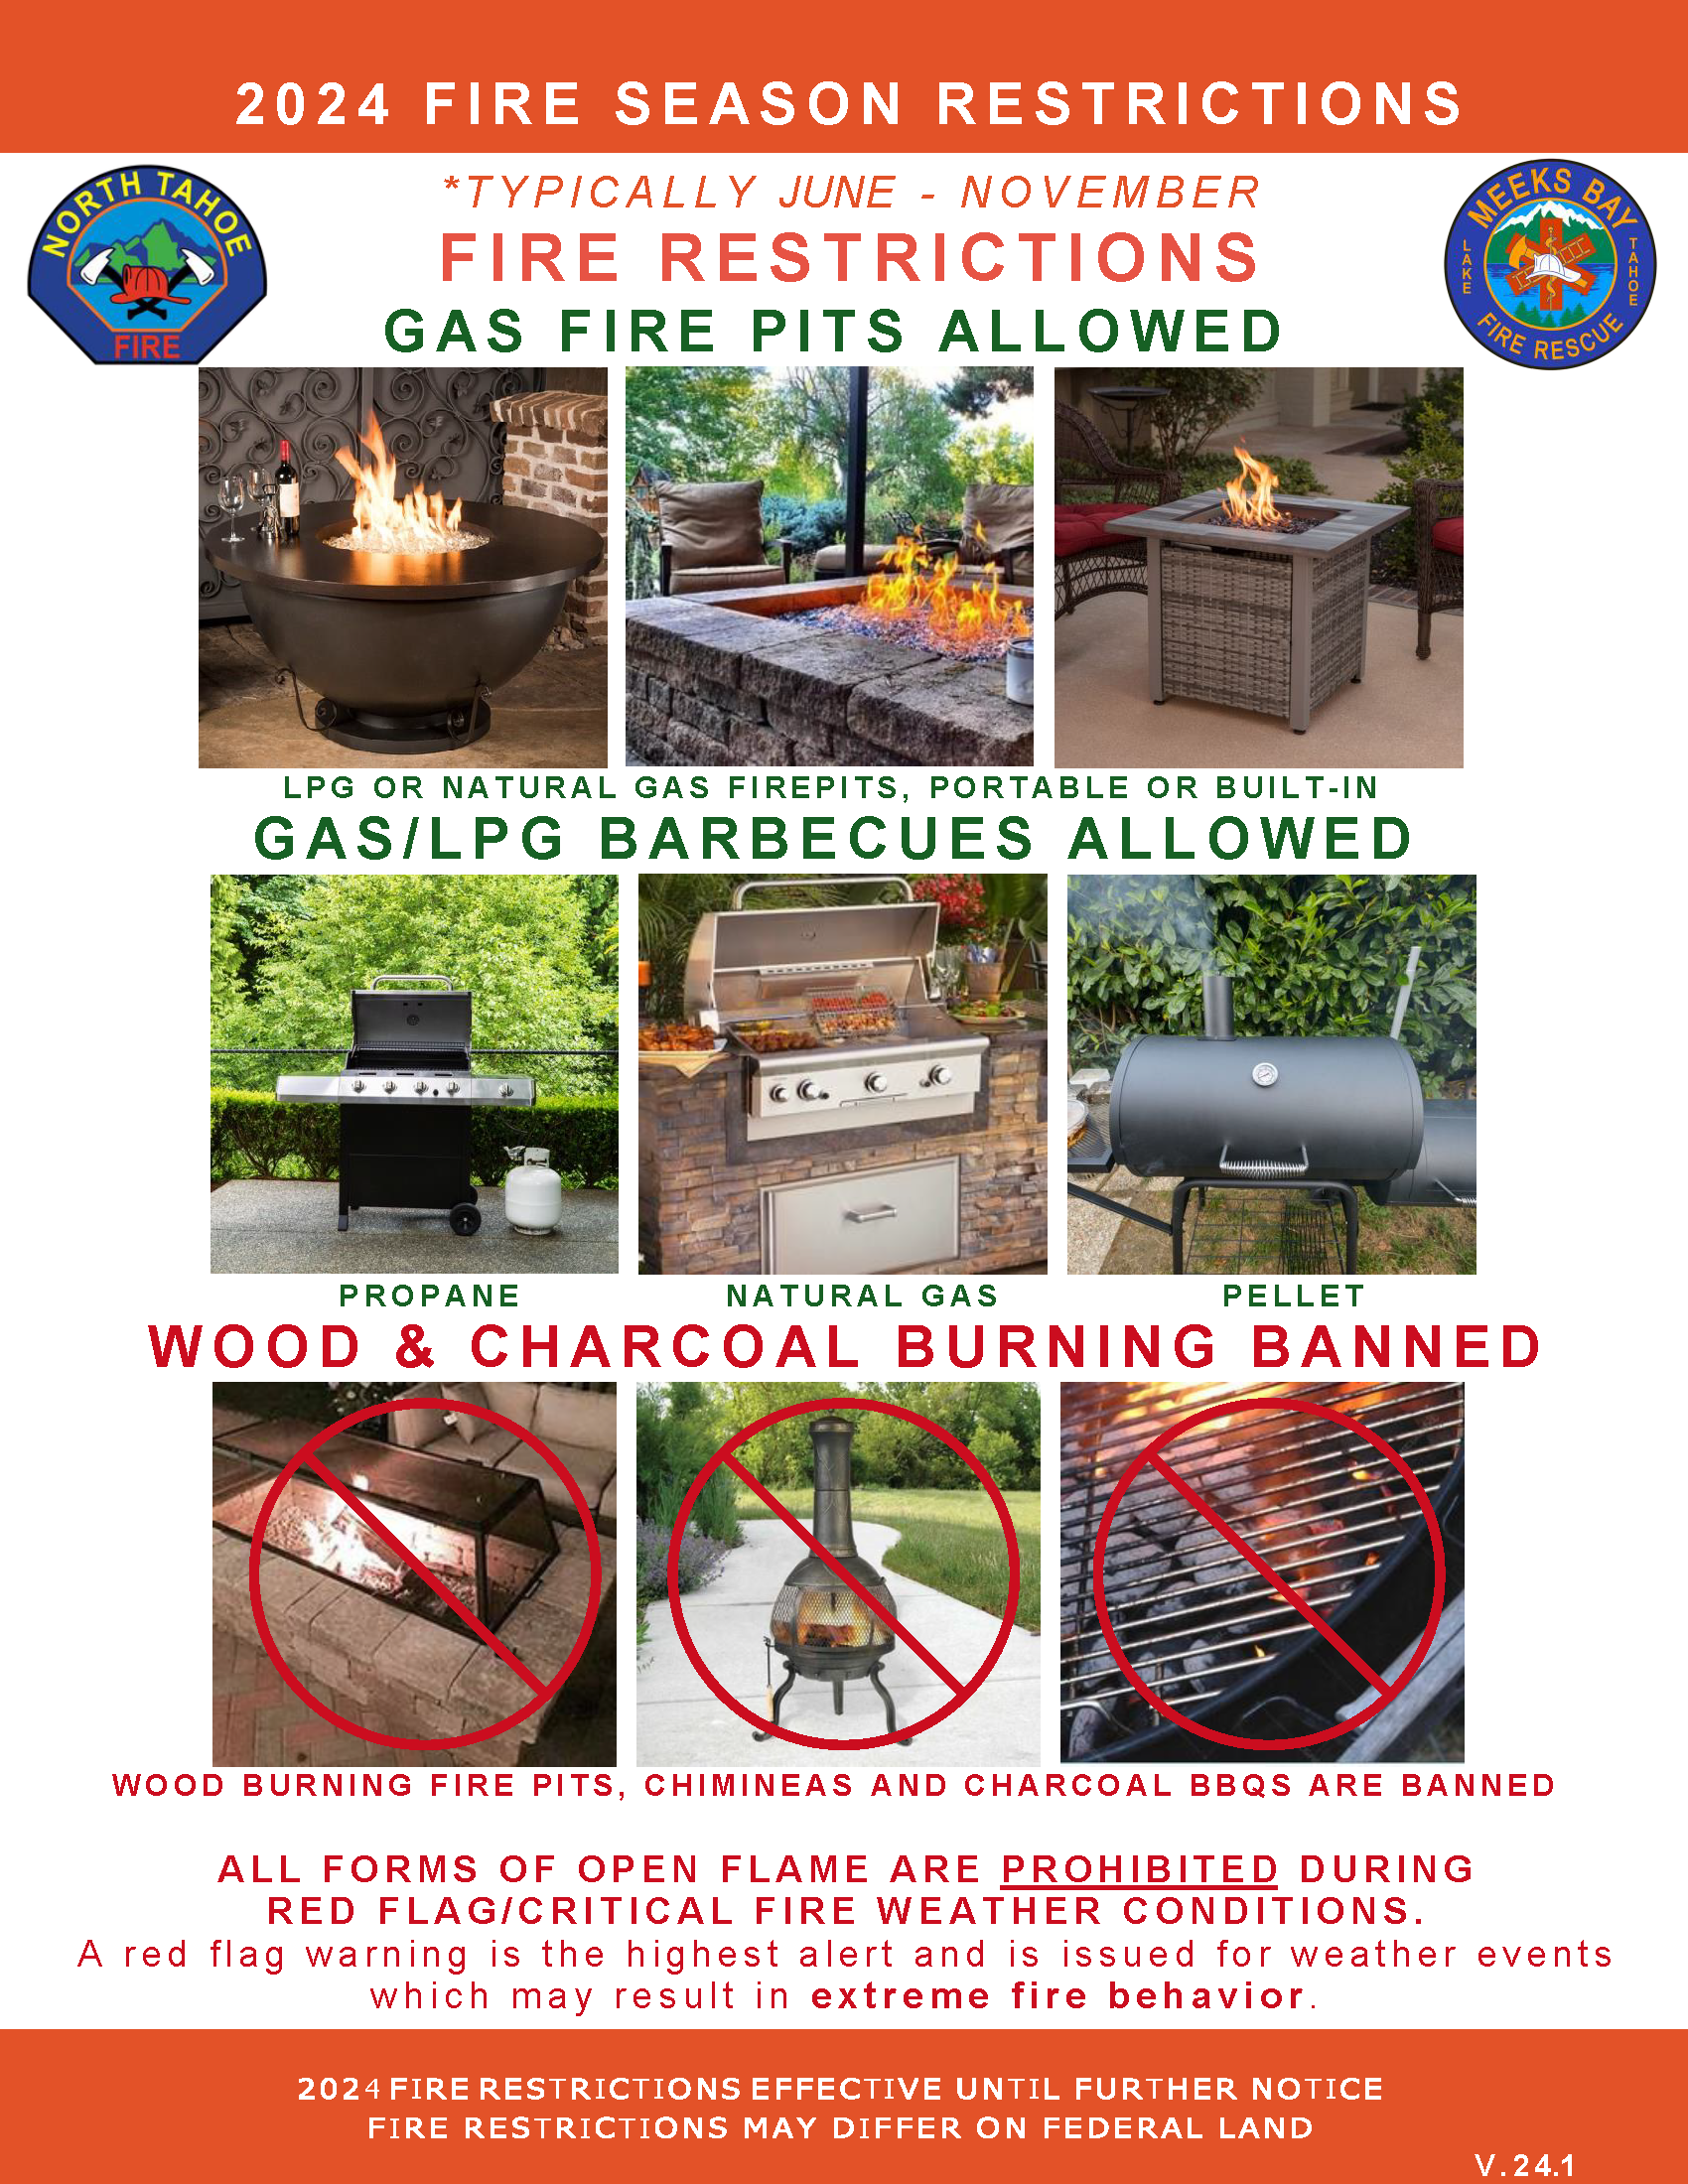 An image of the outdoor wood, gas and charcoal devices and barbcues that are permitted for use during the winter months in Lake Tahoe.